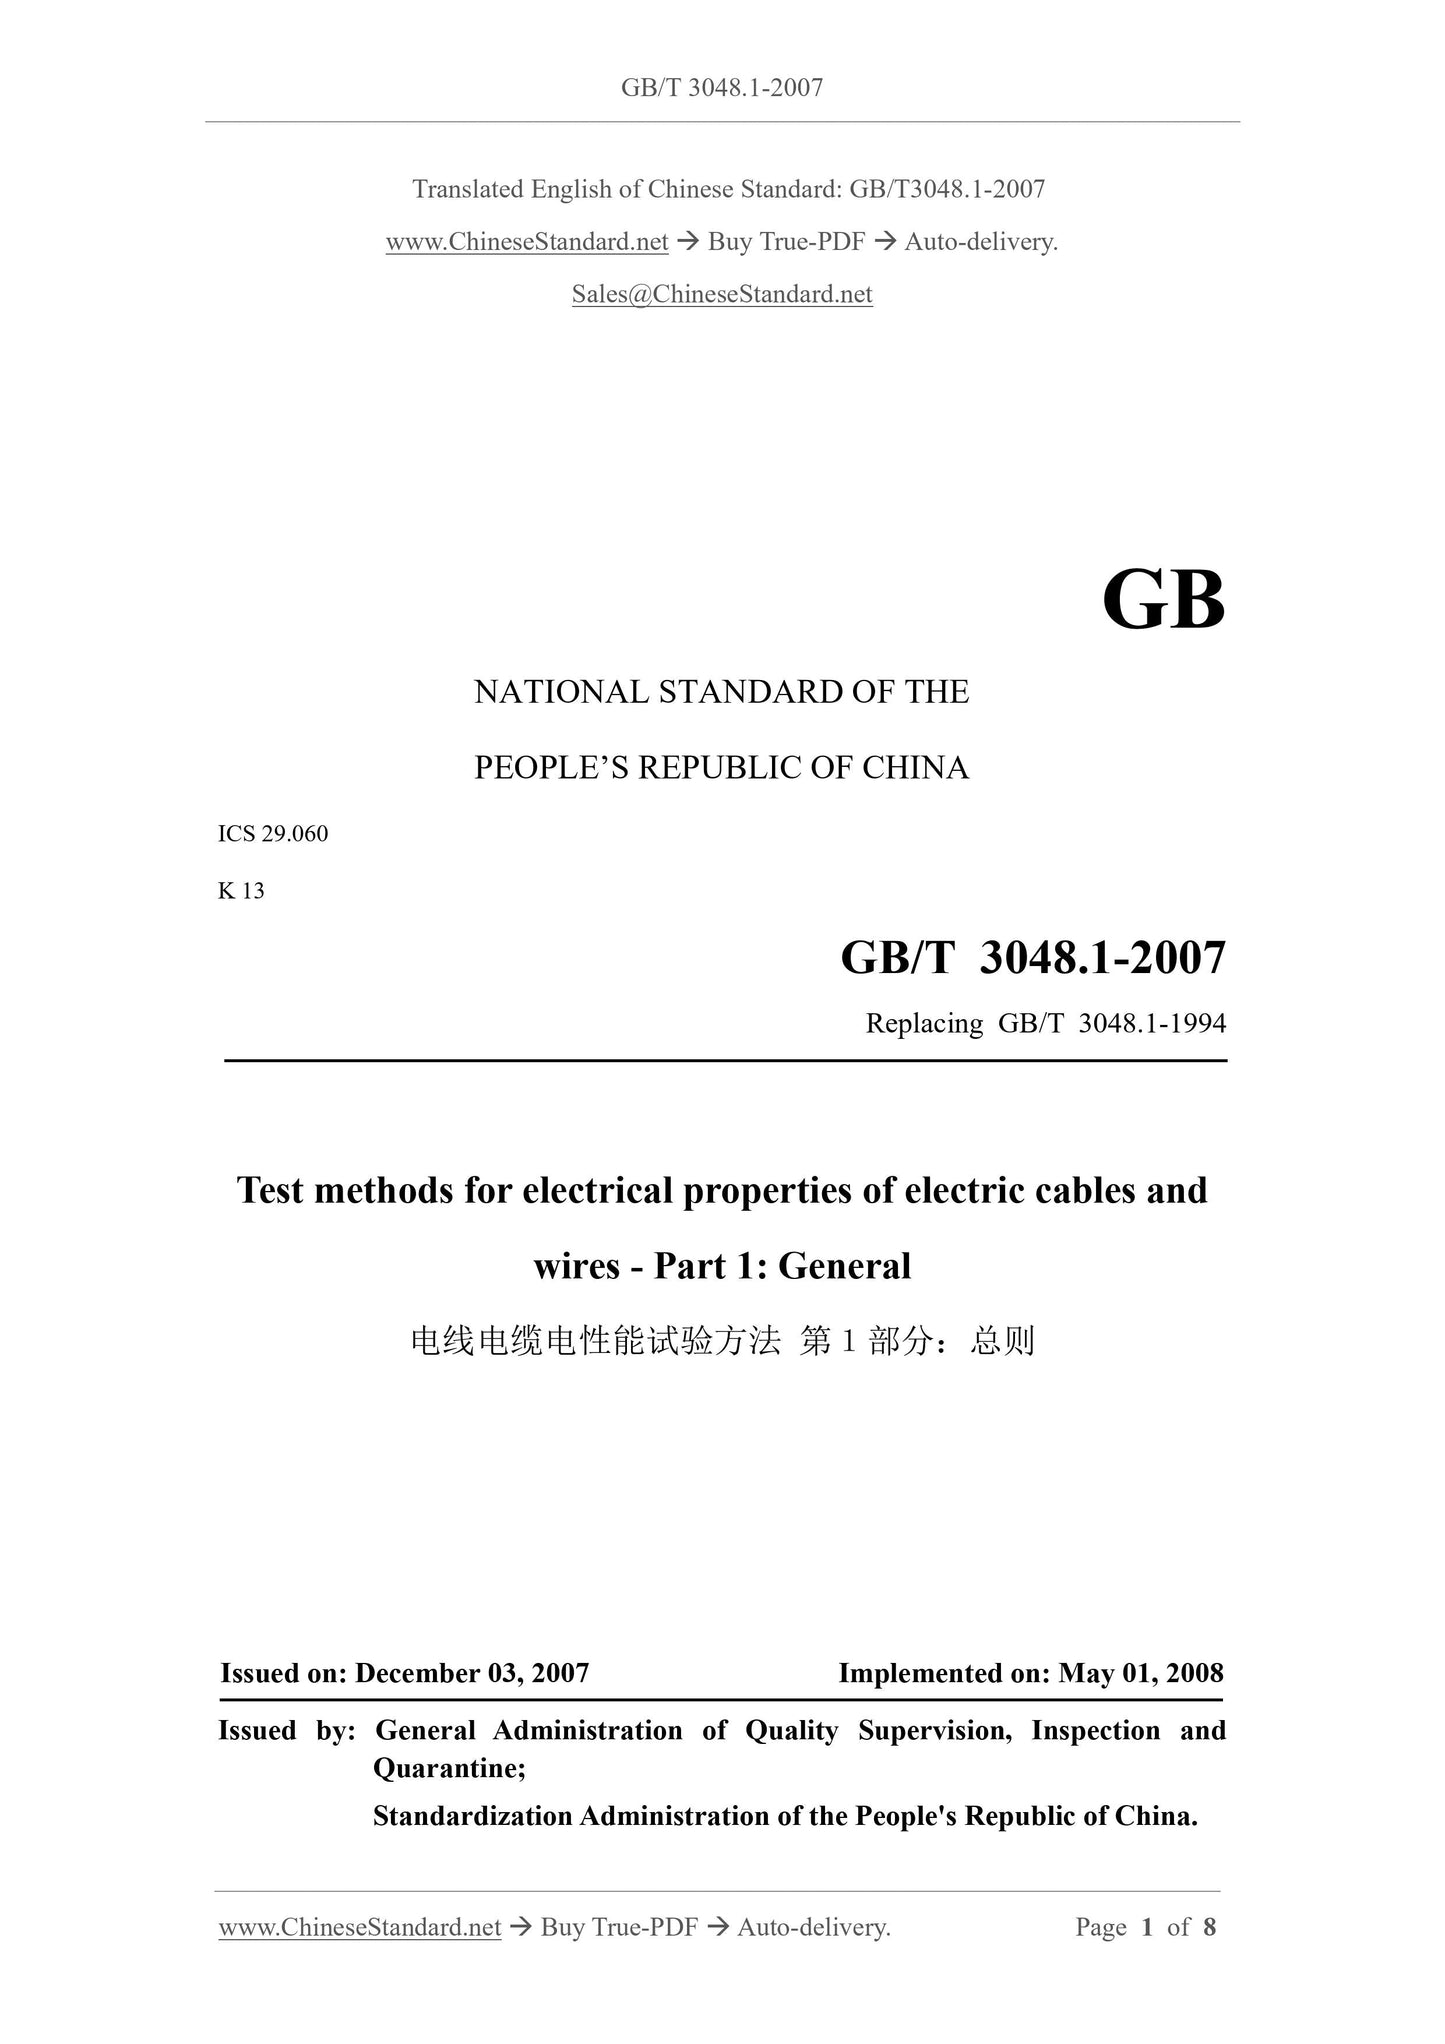 GB/T 3048.1-2007 Page 1